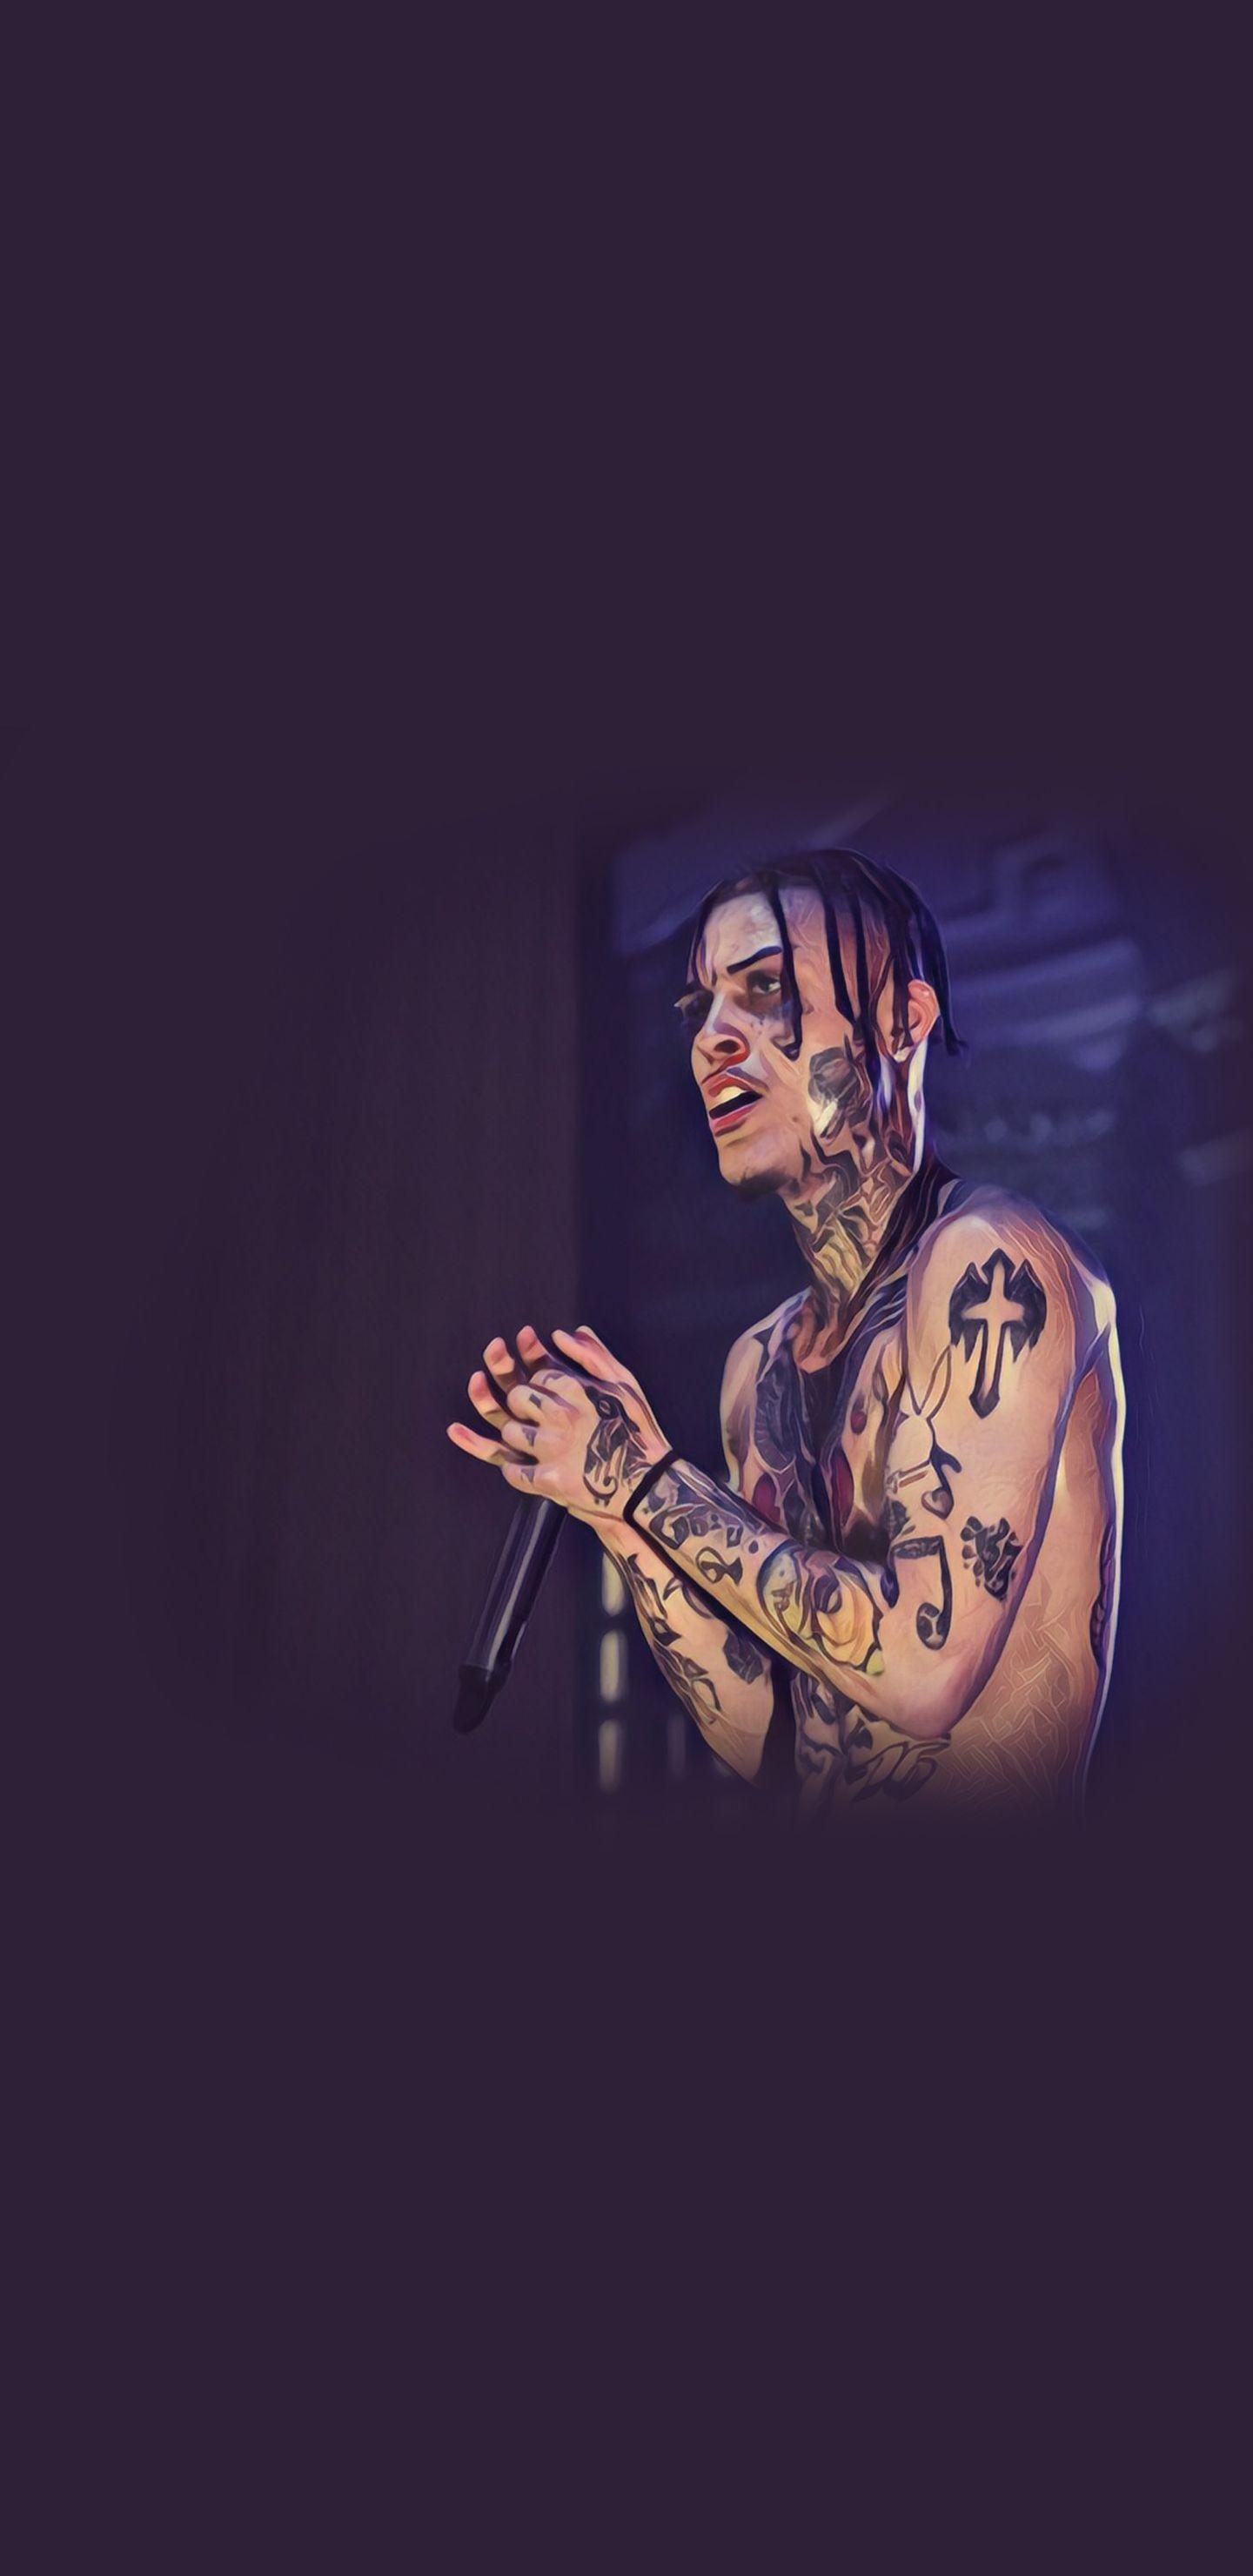 Lil Skies Wallpaper for desktop and mobile in HD resolution